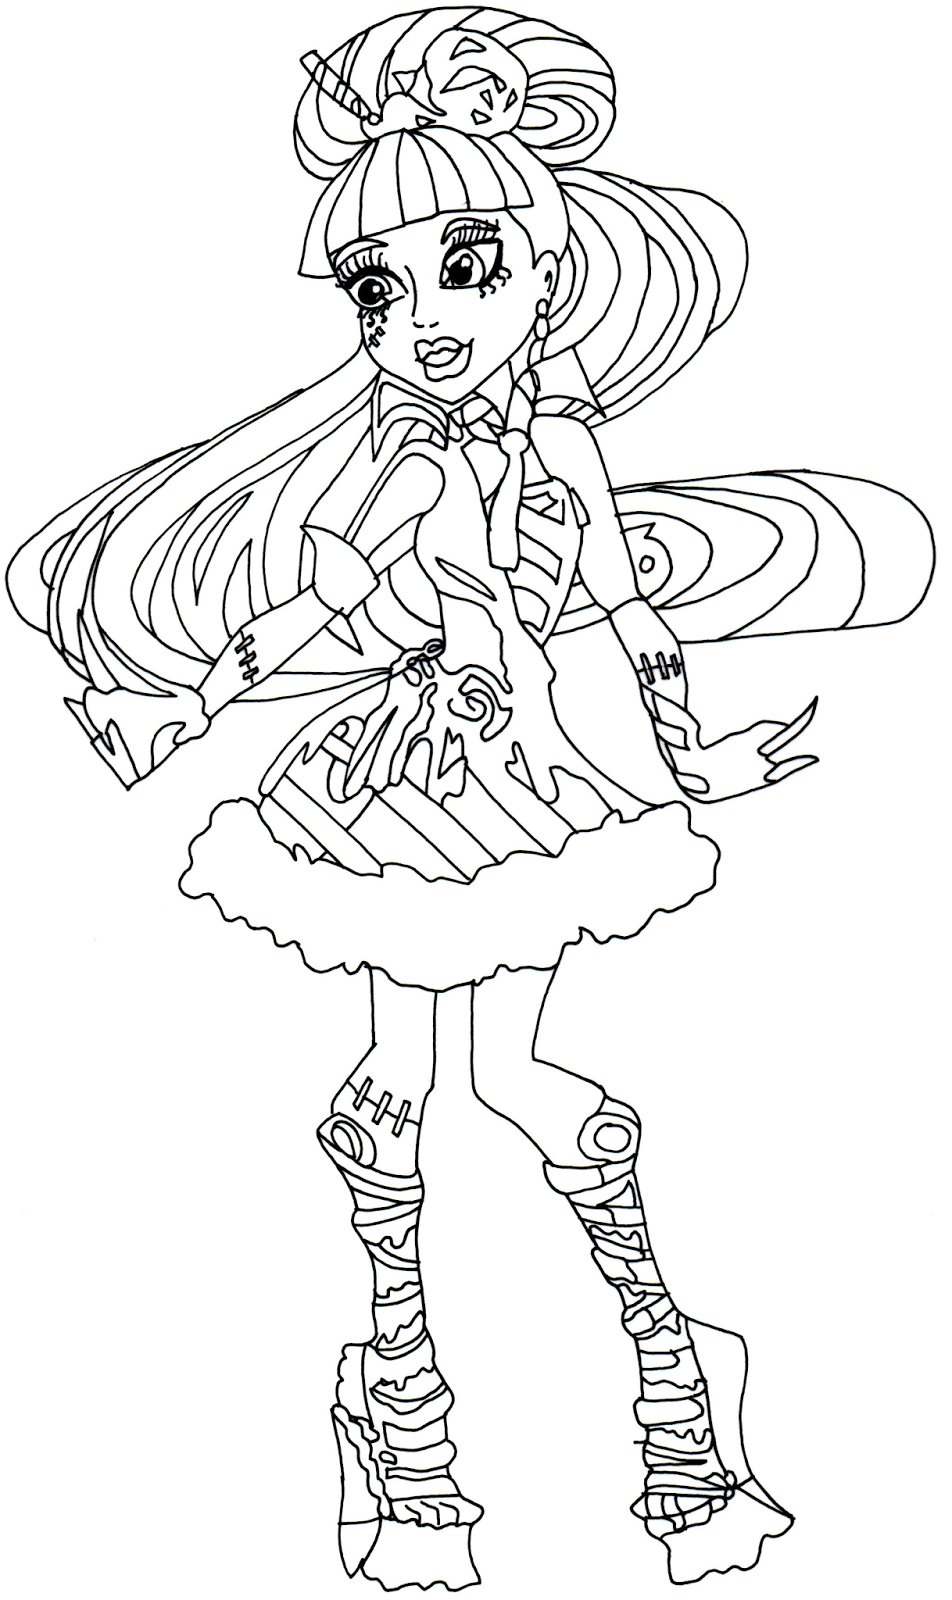 Download Free Printable Monster High Coloring Pages: Frankie Stein Sweet Screams Monster High Coloring Page